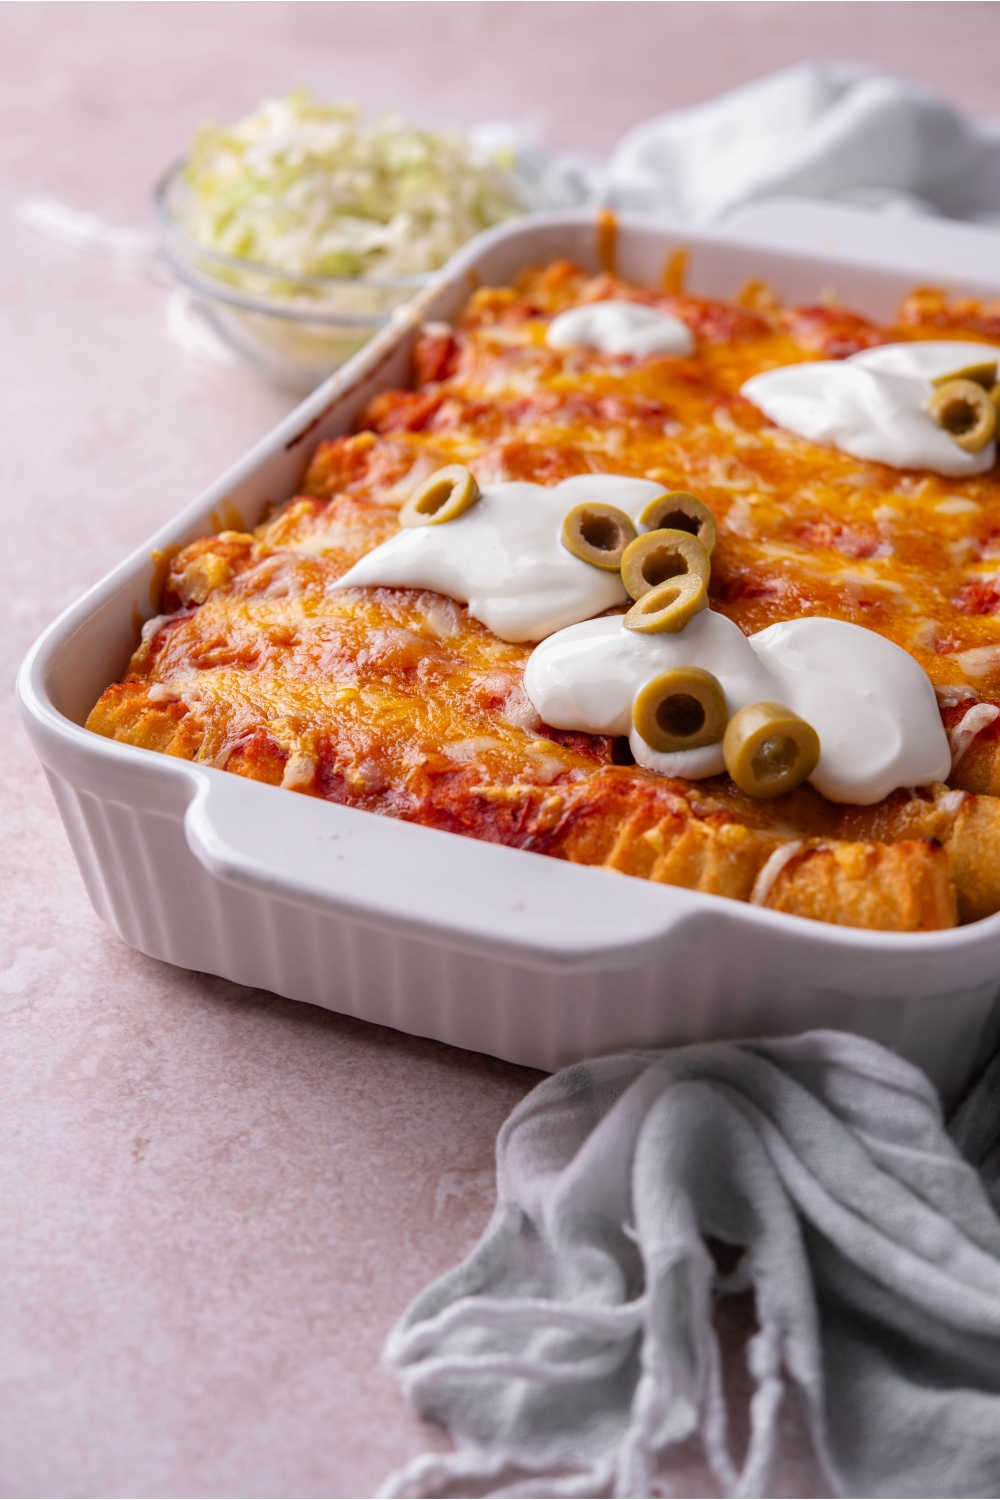 Taco tater tot casserole in a white casserole dish topped with golden brown melted cheese, sour cream, and sliced green olives.